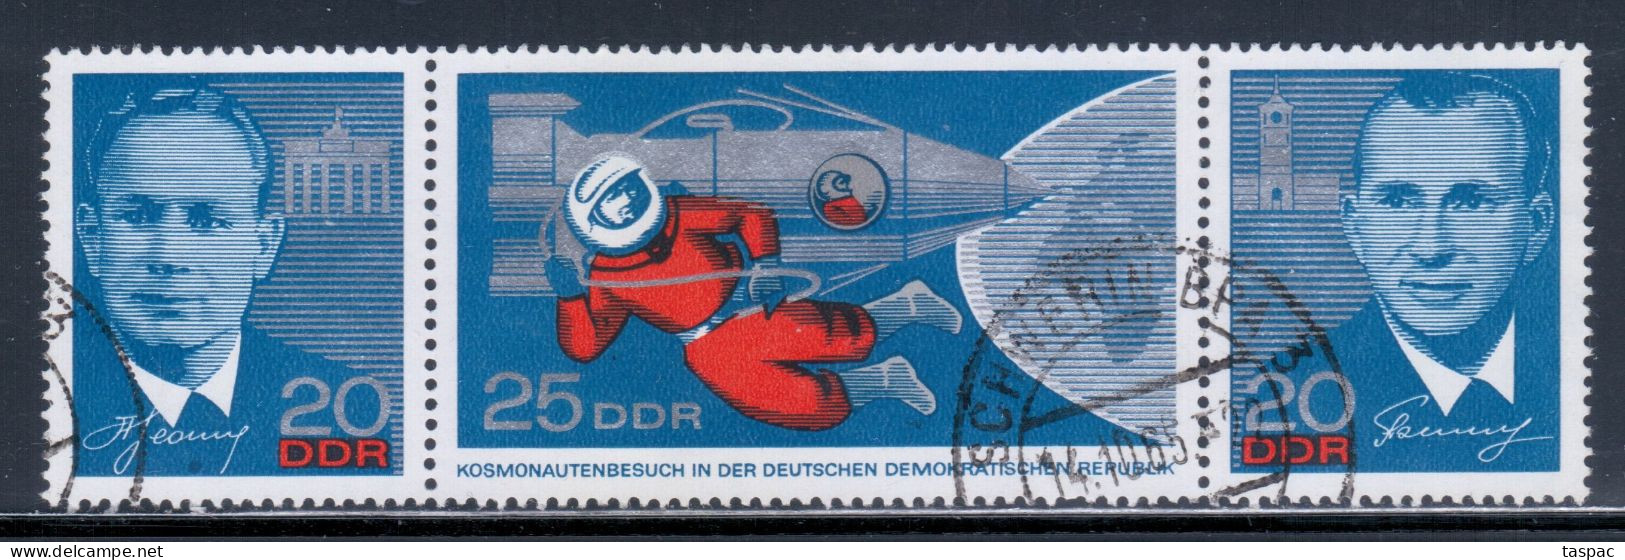 East Germany / DDR 1965 Mi# 1138-1140 Used - Strip Of 3 - Visit Of The Russian Cosmonauts / Space - Oblitérés